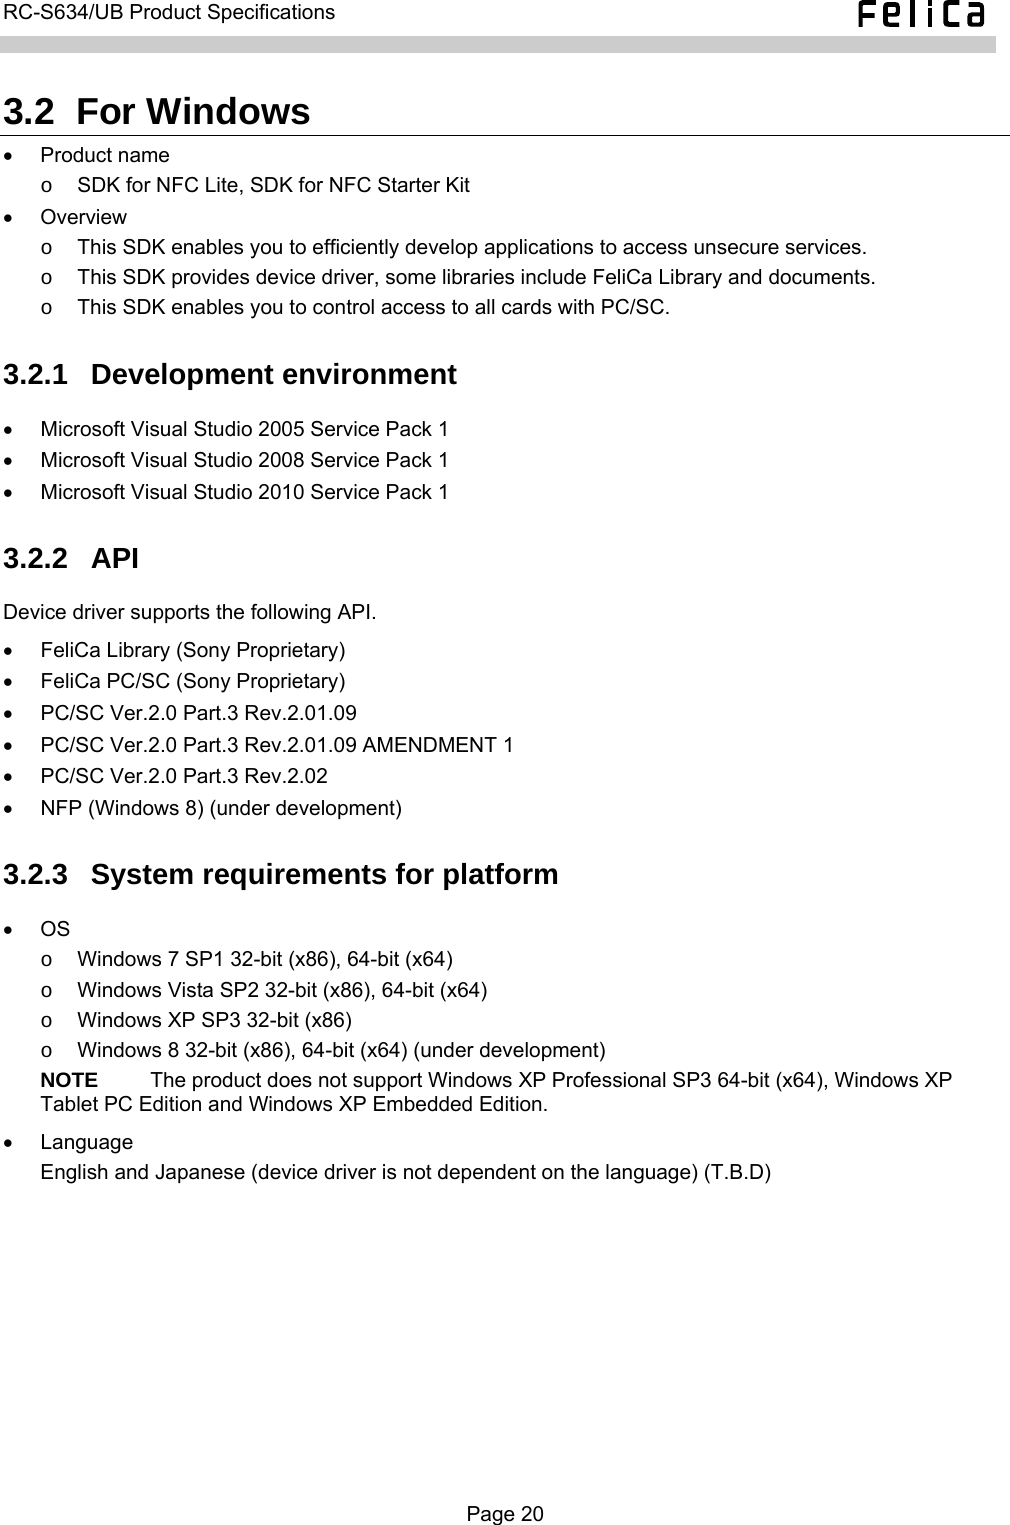   RC-S634/UB Product Specifications  3.2  For Windows • Product name o  SDK for NFC Lite, SDK for NFC Starter Kit • Overview  o  This SDK enables you to efficiently develop applications to access unsecure services. o  This SDK provides device driver, some libraries include FeliCa Library and documents. o  This SDK enables you to control access to all cards with PC/SC. 3.2.1  Development environment •  Microsoft Visual Studio 2005 Service Pack 1 •  Microsoft Visual Studio 2008 Service Pack 1 •  Microsoft Visual Studio 2010 Service Pack 1 3.2.2  API Device driver supports the following API. •  FeliCa Library (Sony Proprietary) •  FeliCa PC/SC (Sony Proprietary) •  PC/SC Ver.2.0 Part.3 Rev.2.01.09 •  PC/SC Ver.2.0 Part.3 Rev.2.01.09 AMENDMENT 1 •  PC/SC Ver.2.0 Part.3 Rev.2.02 •  NFP (Windows 8) (under development) 3.2.3  System requirements for platform • OS  o  Windows 7 SP1 32-bit (x86), 64-bit (x64) o  Windows Vista SP2 32-bit (x86), 64-bit (x64) o  Windows XP SP3 32-bit (x86) o  Windows 8 32-bit (x86), 64-bit (x64) (under development) NOTE     The product does not support Windows XP Professional SP3 64-bit (x64), Windows XP Tablet PC Edition and Windows XP Embedded Edition. • Language English and Japanese (device driver is not dependent on the language) (T.B.D)  Page 20  